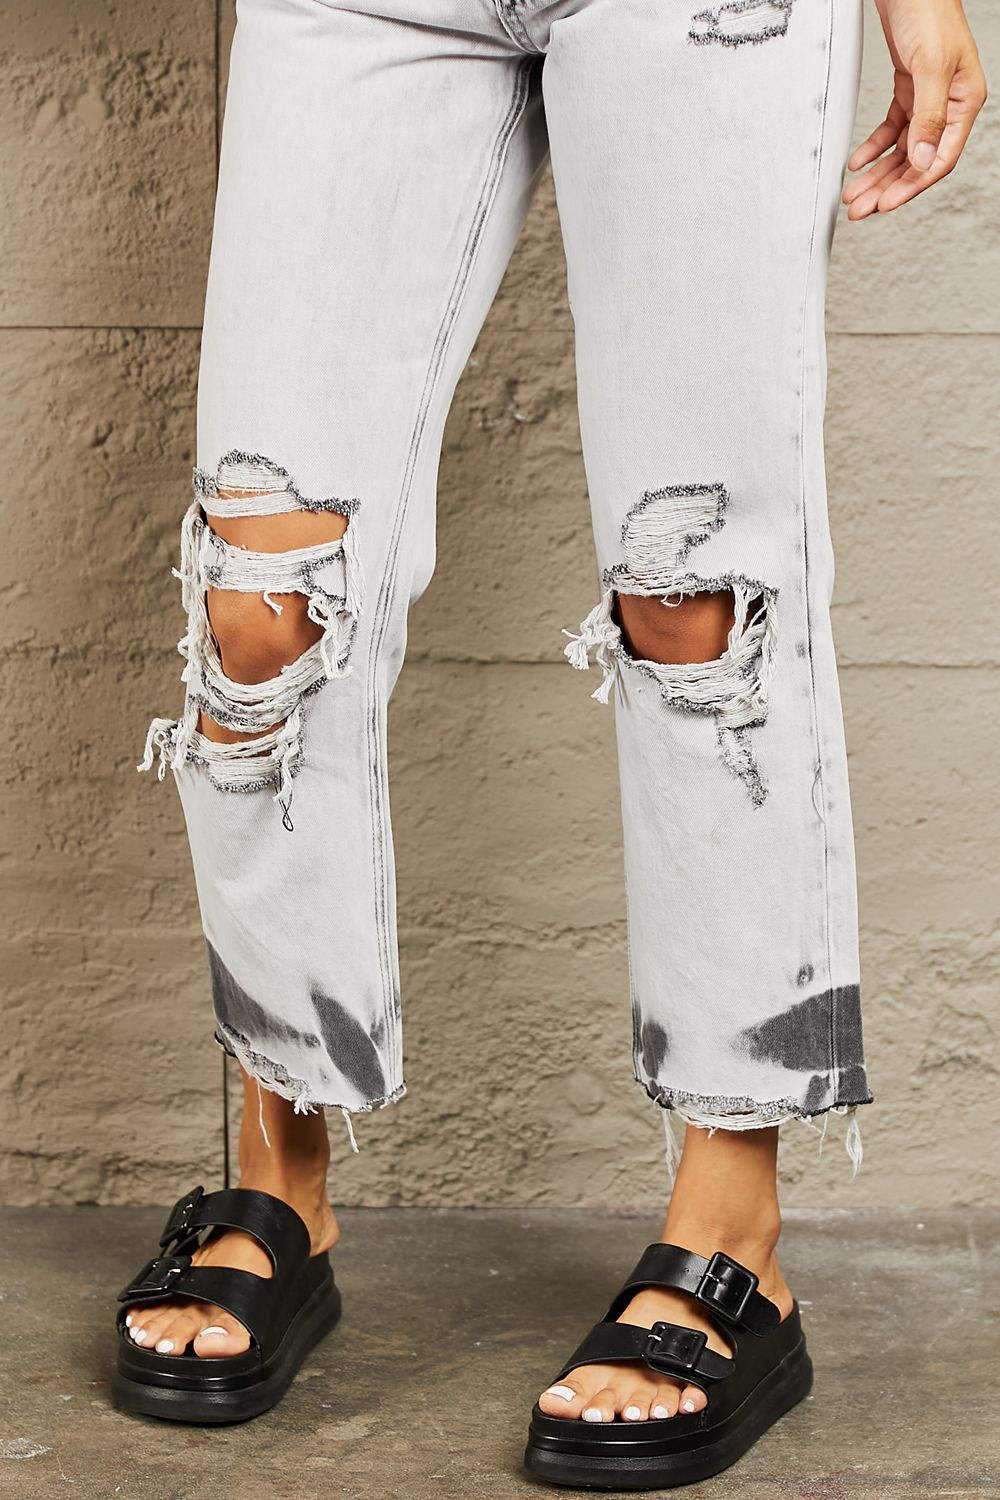 BAYEAS Acid Wash Accent Cropped Mom Jeans - Alonna's Legging Land